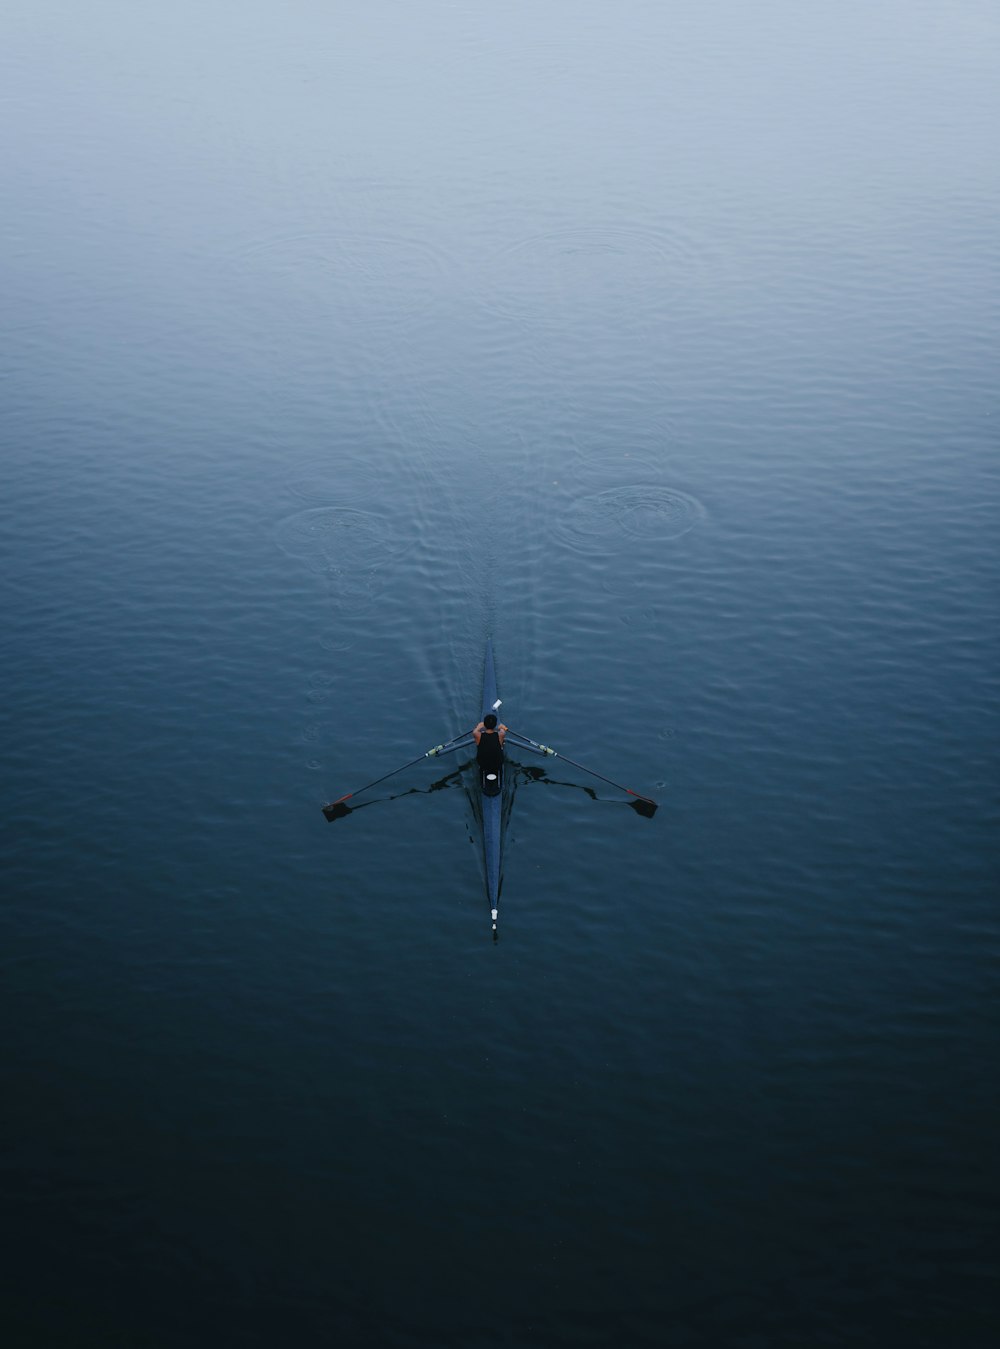 a person rowing a boat on a body of water